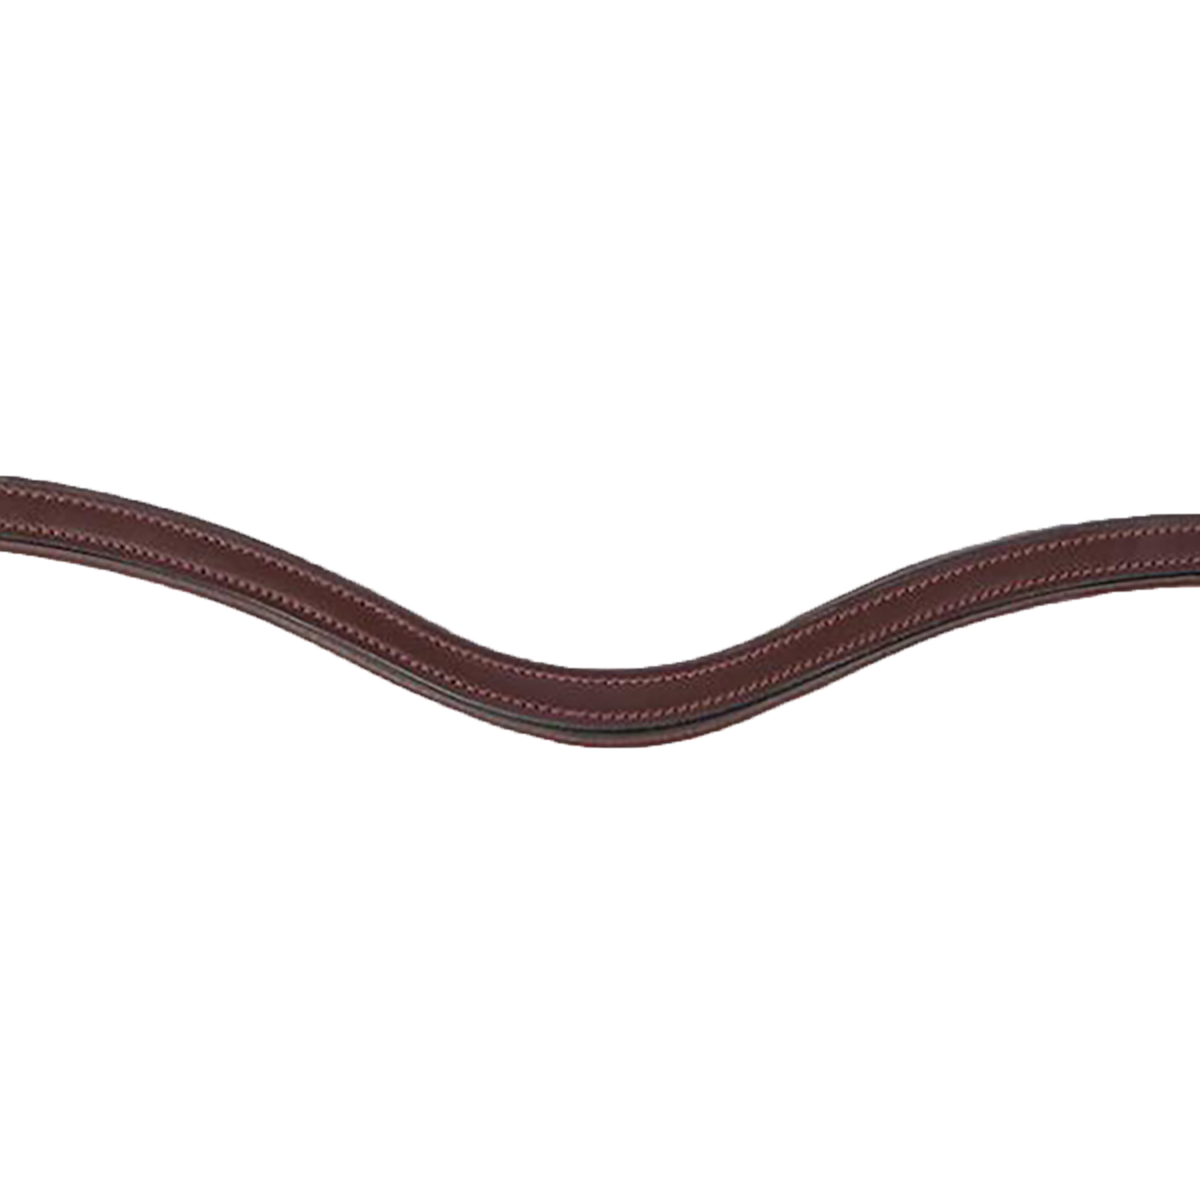 Frontriem Montar Classic Curved Donkerbruin, PAARD in donkerbruin